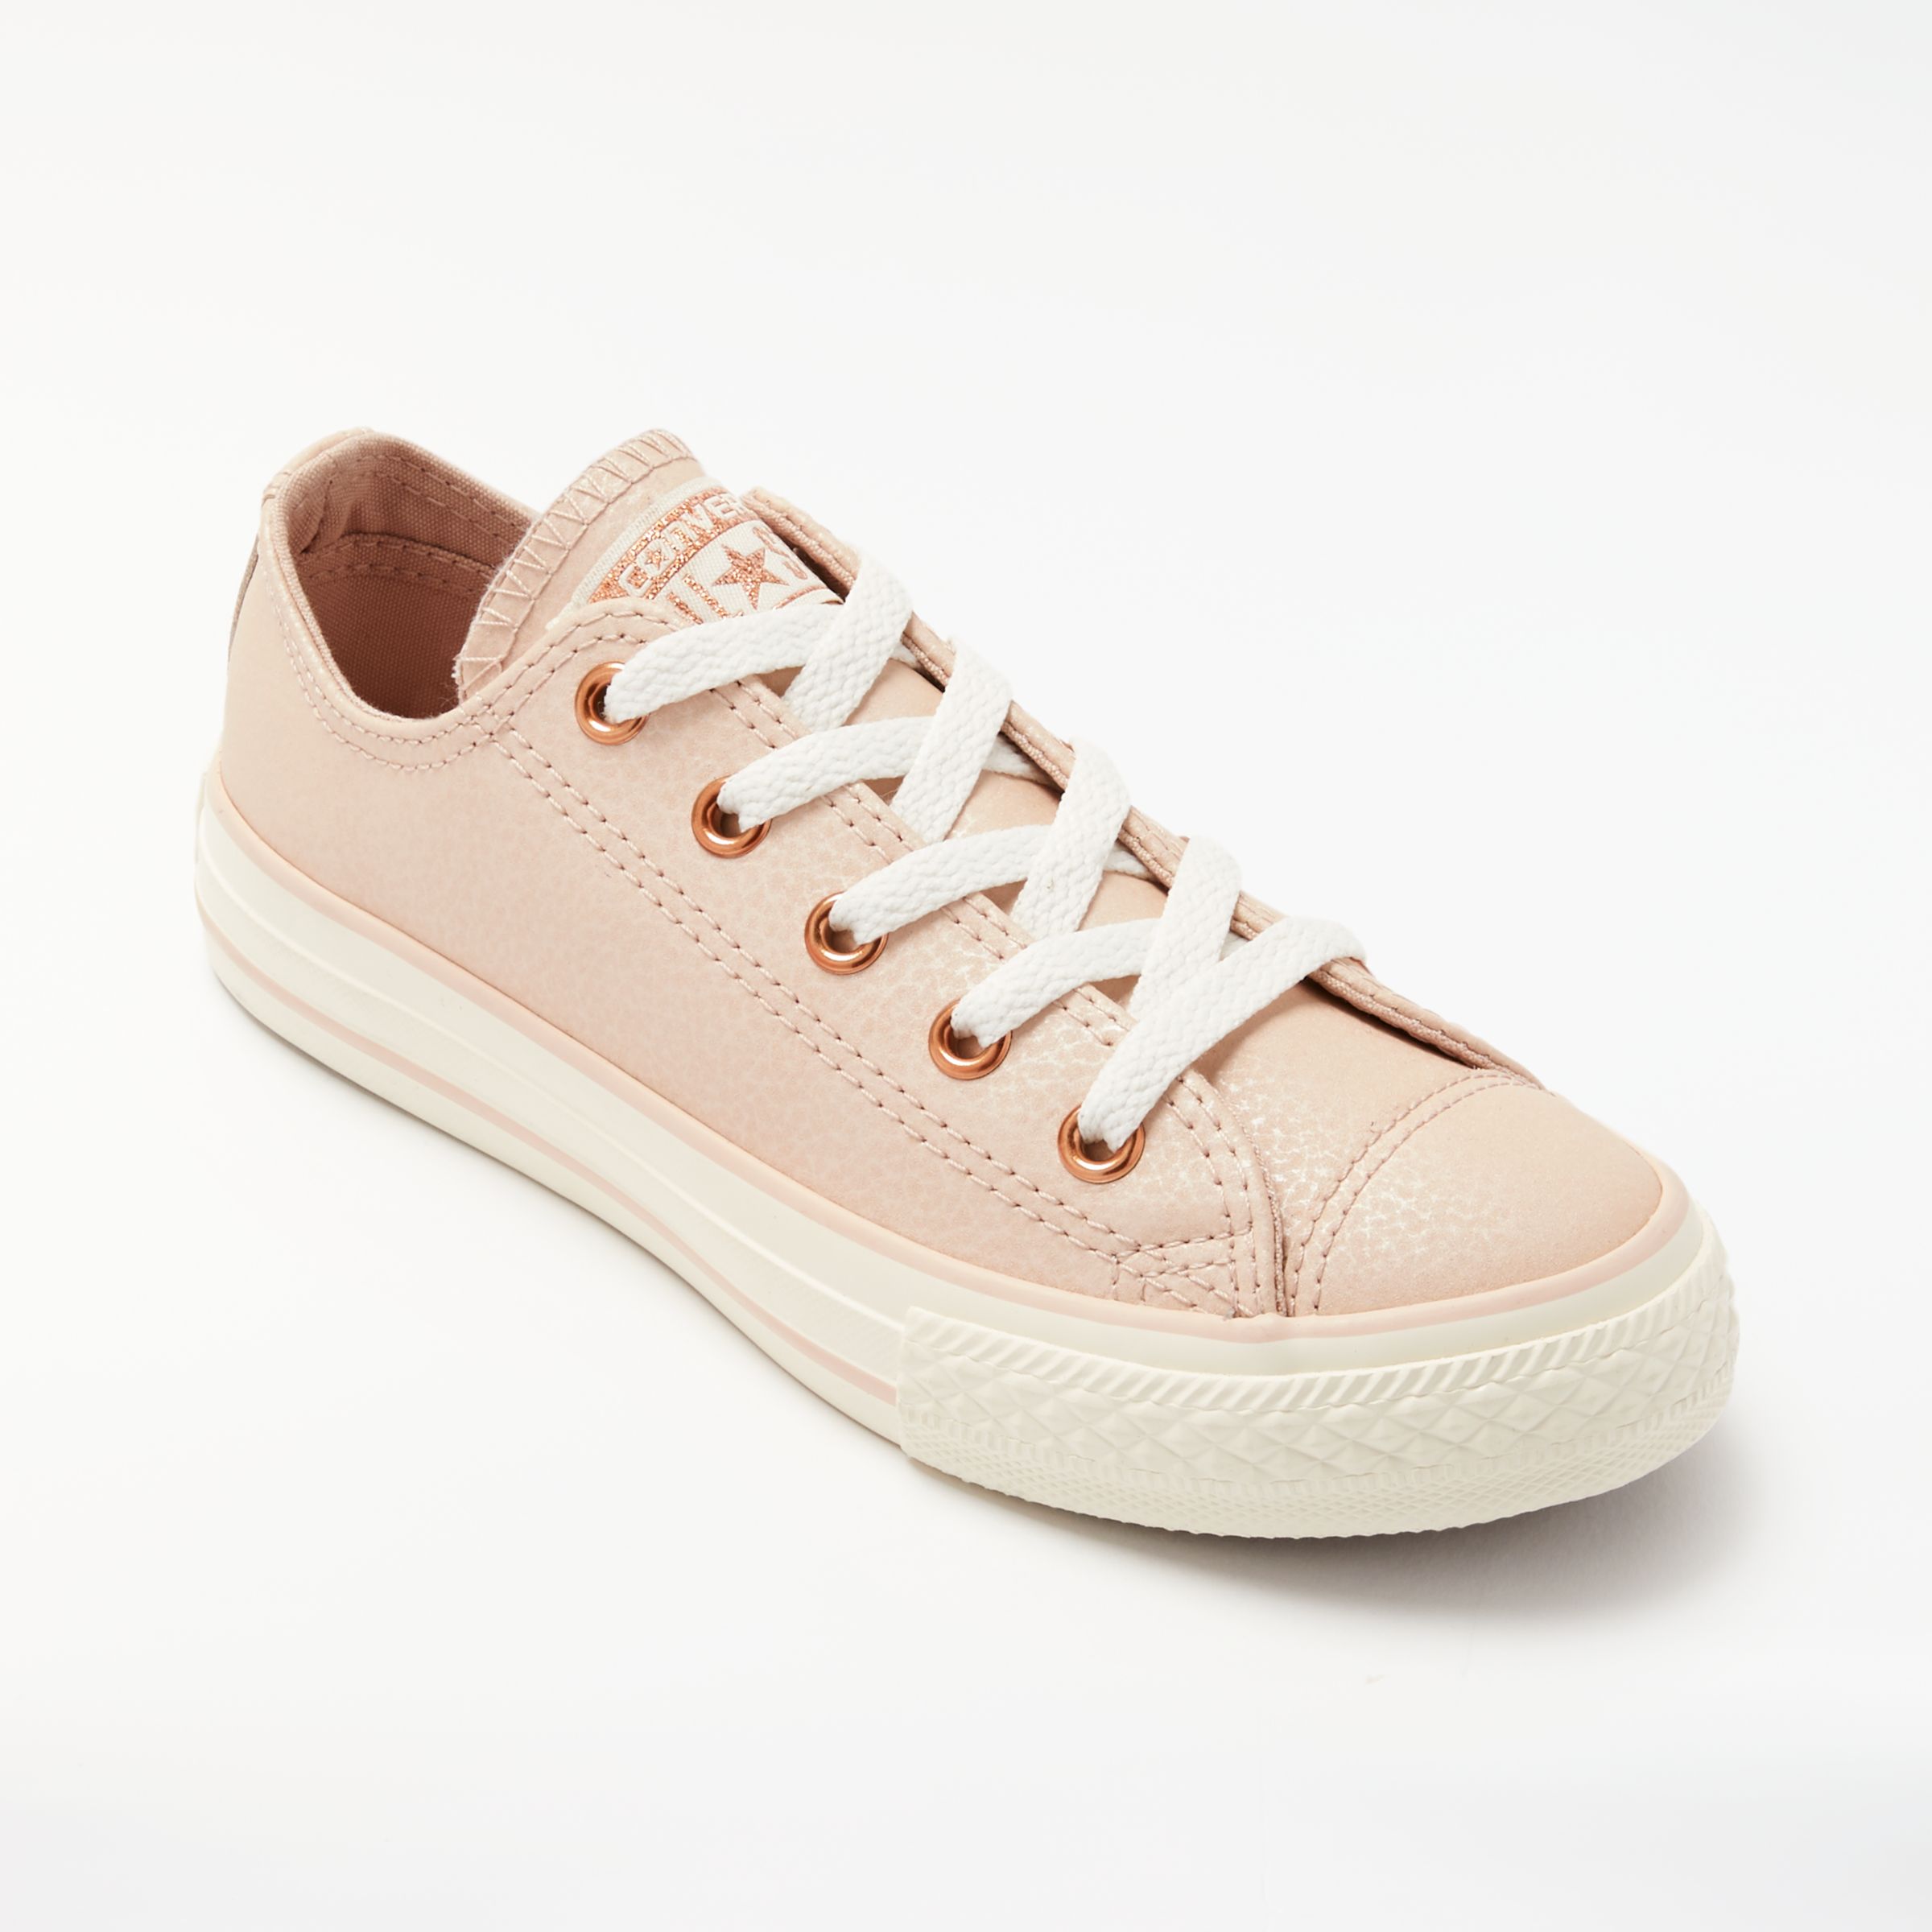 Converse Children's Chuck Taylor All Star Ox Trainers, Pink, 10 Jnr